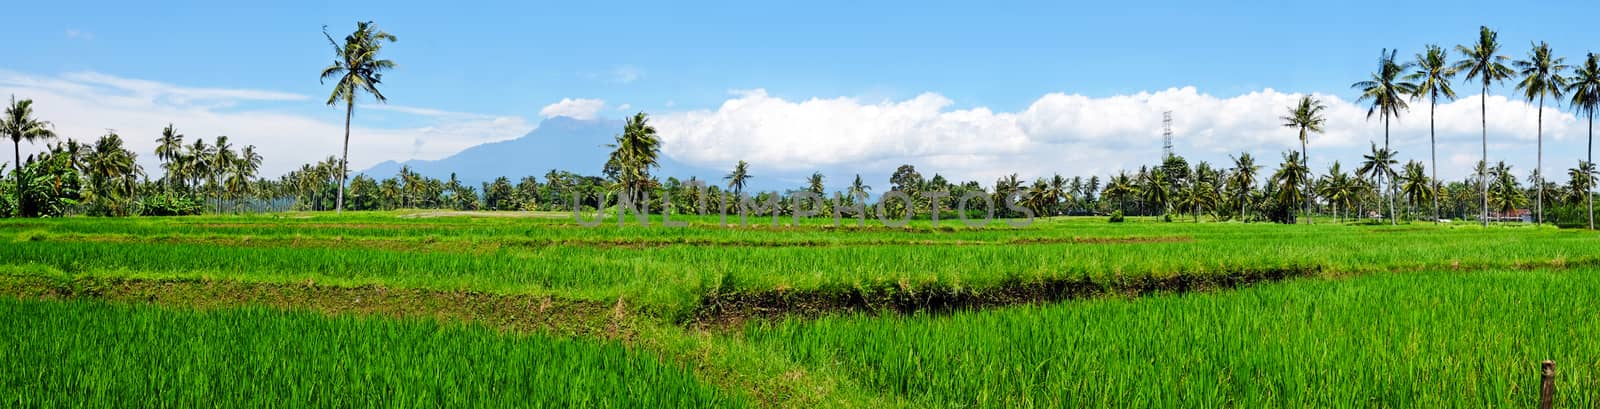 Panorama from rice field landscape on Java island, Indonesia